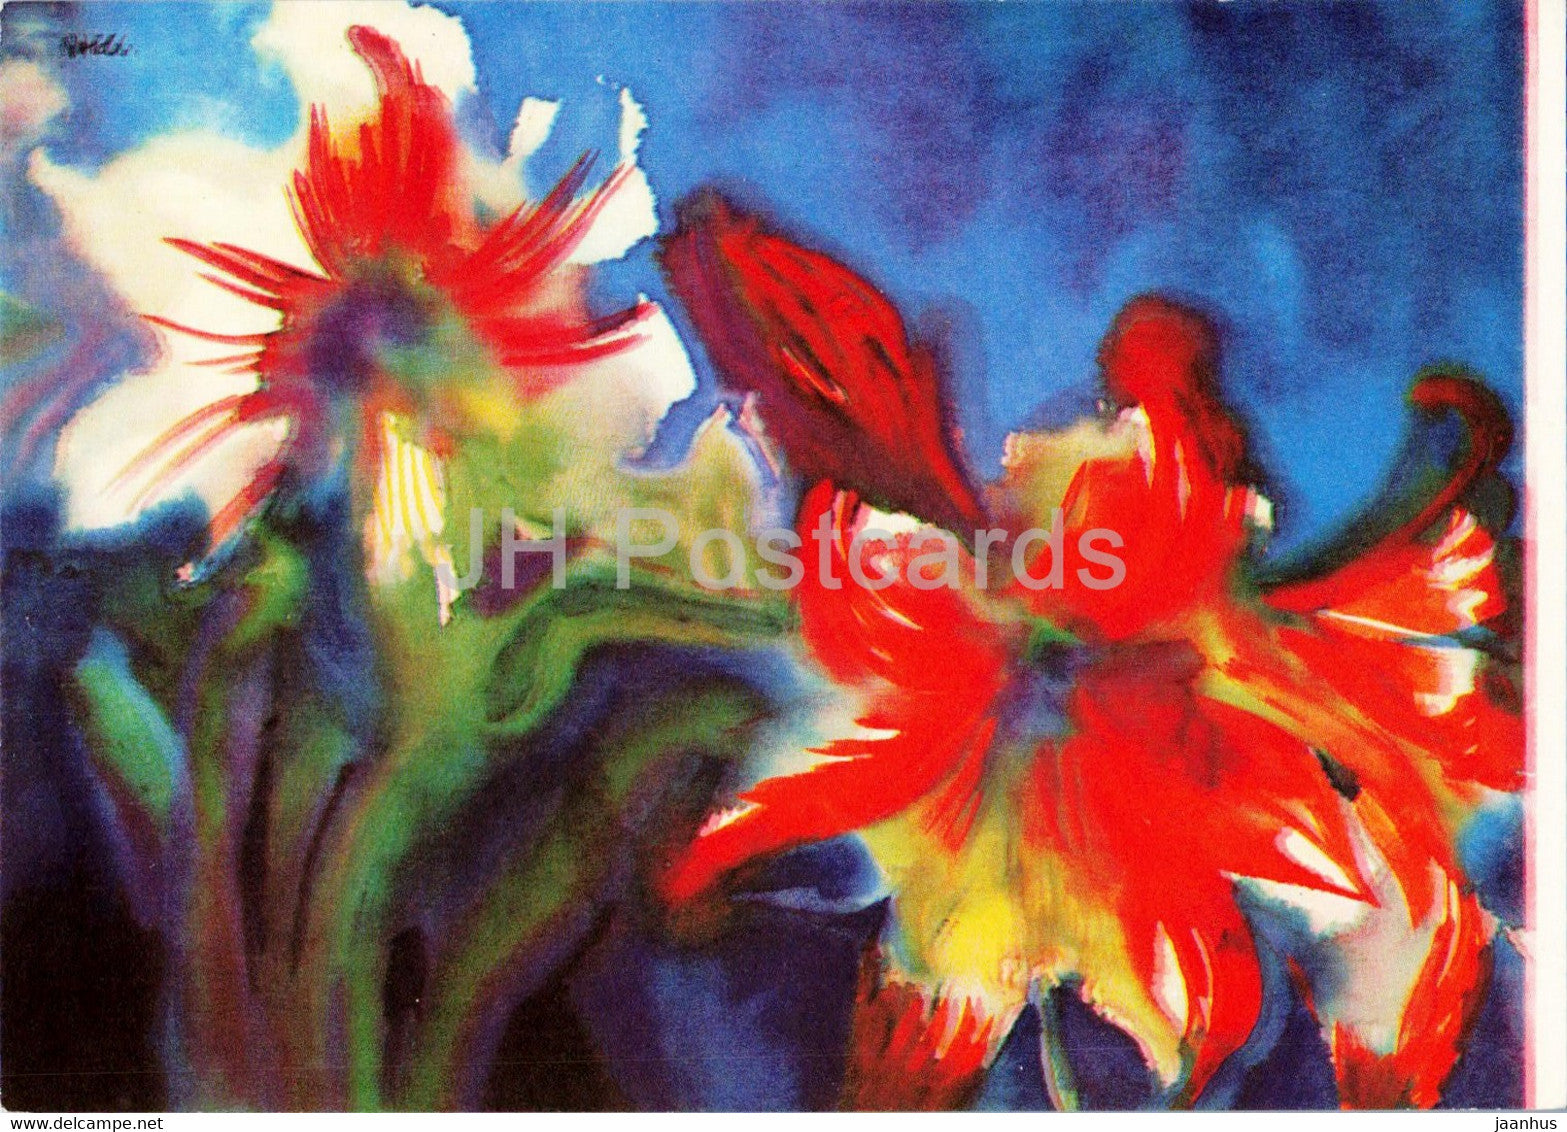 painting by Emil Nolde - Weisse und Rote Amaryllis - White and Red amaryllises - German art - Germany - unused - JH Postcards